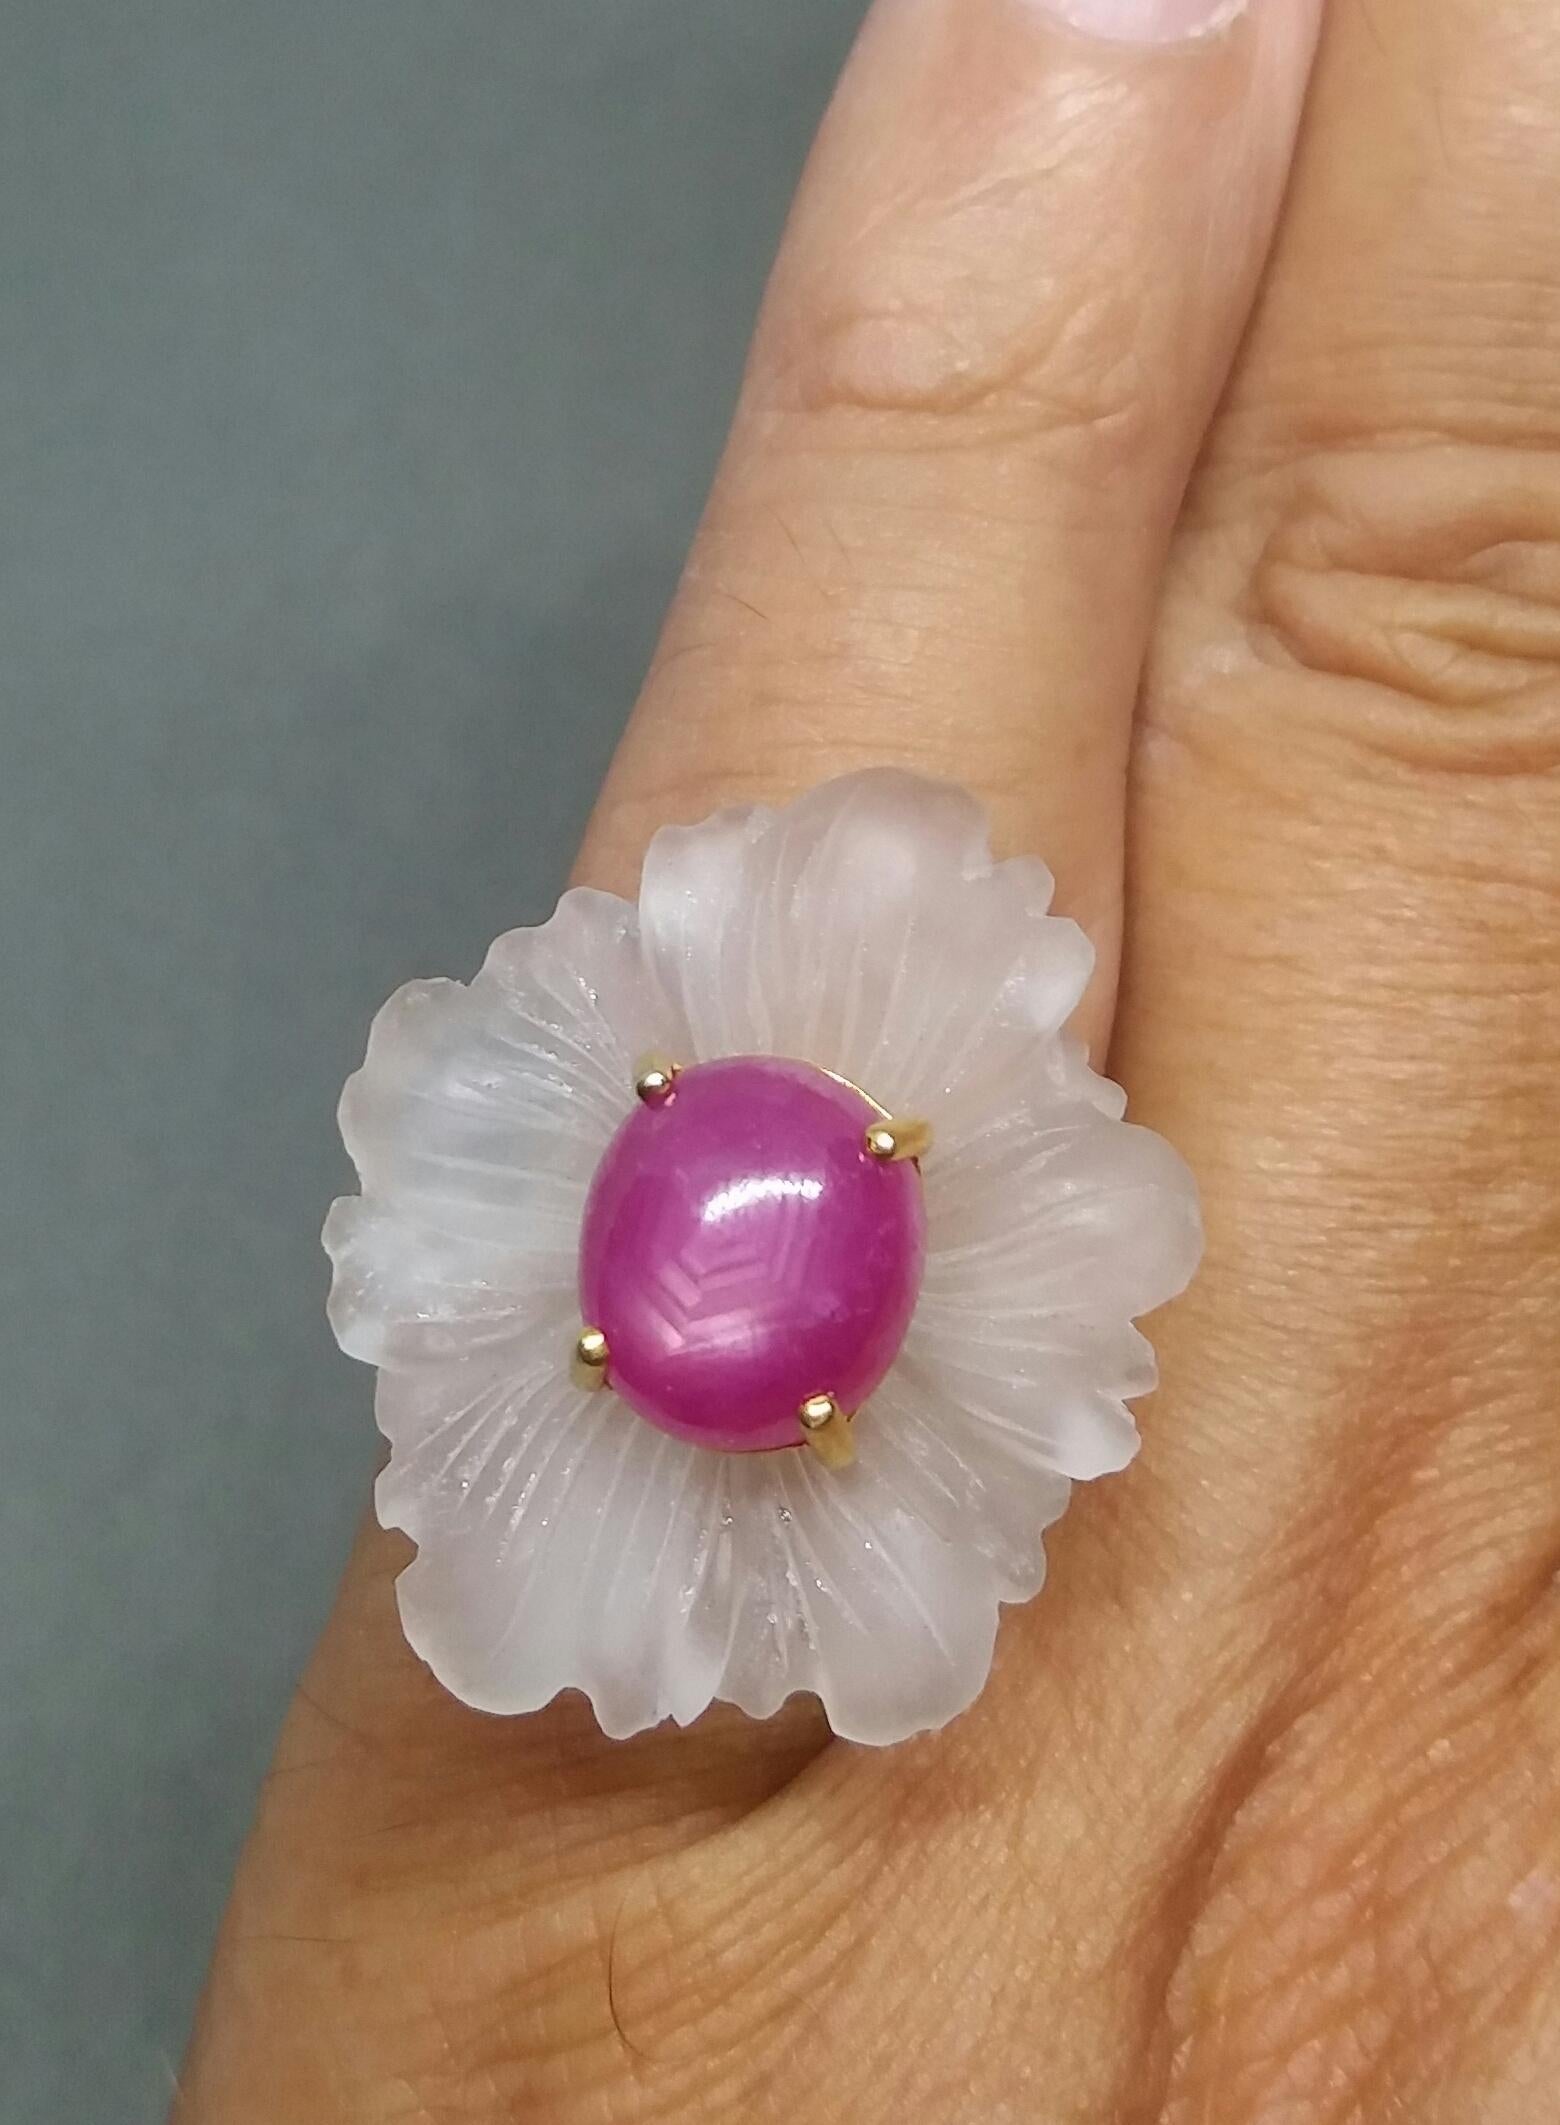 Flower carved Natural Rock Crystal (White Quartz) of 30 x 25 mm size with in the center a Natural Ruby Cabochon oval shape 11 x 9 mm size set in solid 14 Kt yellow gold is mounted on top of a 14 Kt. yellow gold shank. US size # 7 (but resizable